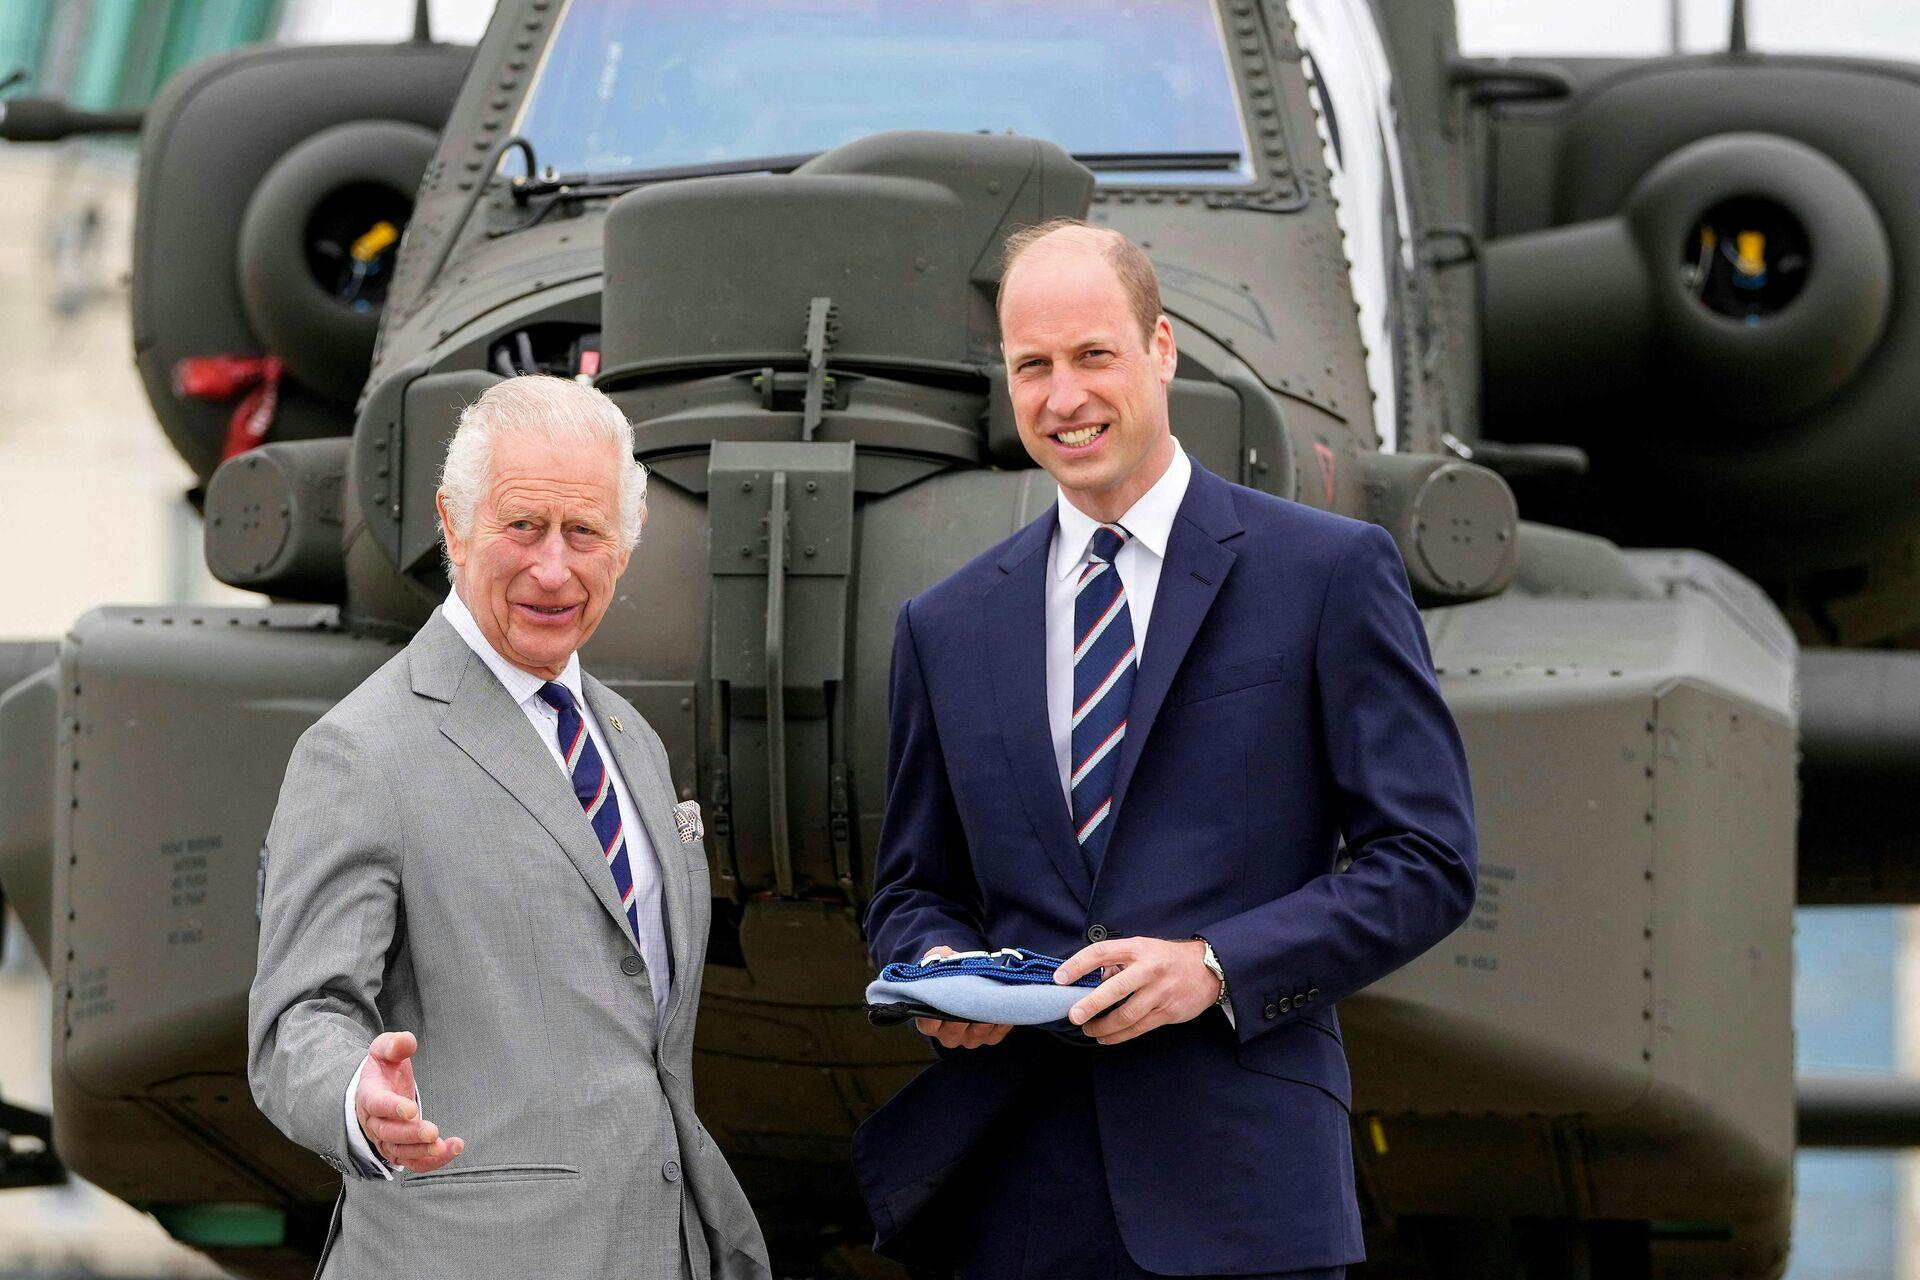 Britain's King Charles III officially hands over the role of Colonel-in-Chief of the Army Air Corps to Britain's Prince William, Prince of Wales in front of an Apache helicopter at the Army Aviation Centre in Middle Wallop, England, on May 13, 2024. (Photo by Kin Cheung / POOL / AFP)